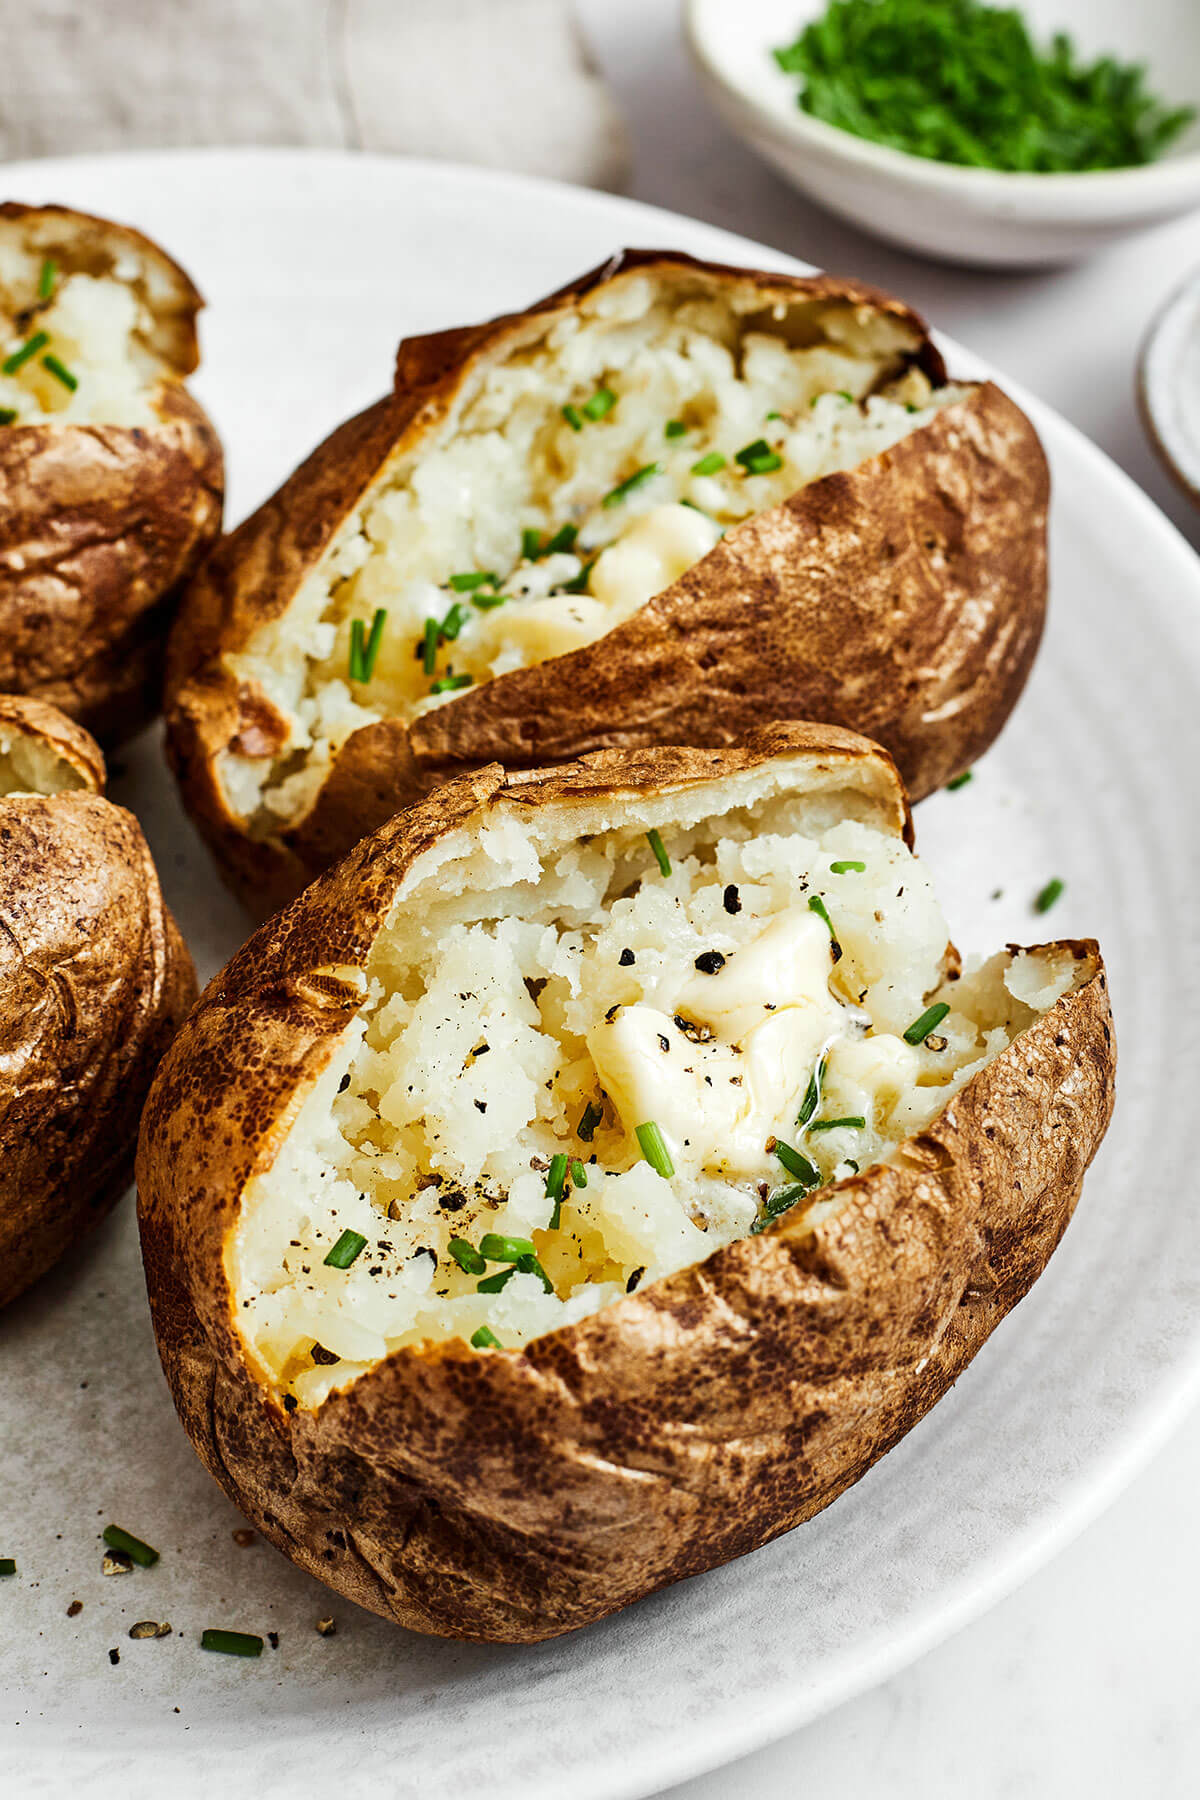 A plate of air fryer baked potatoes